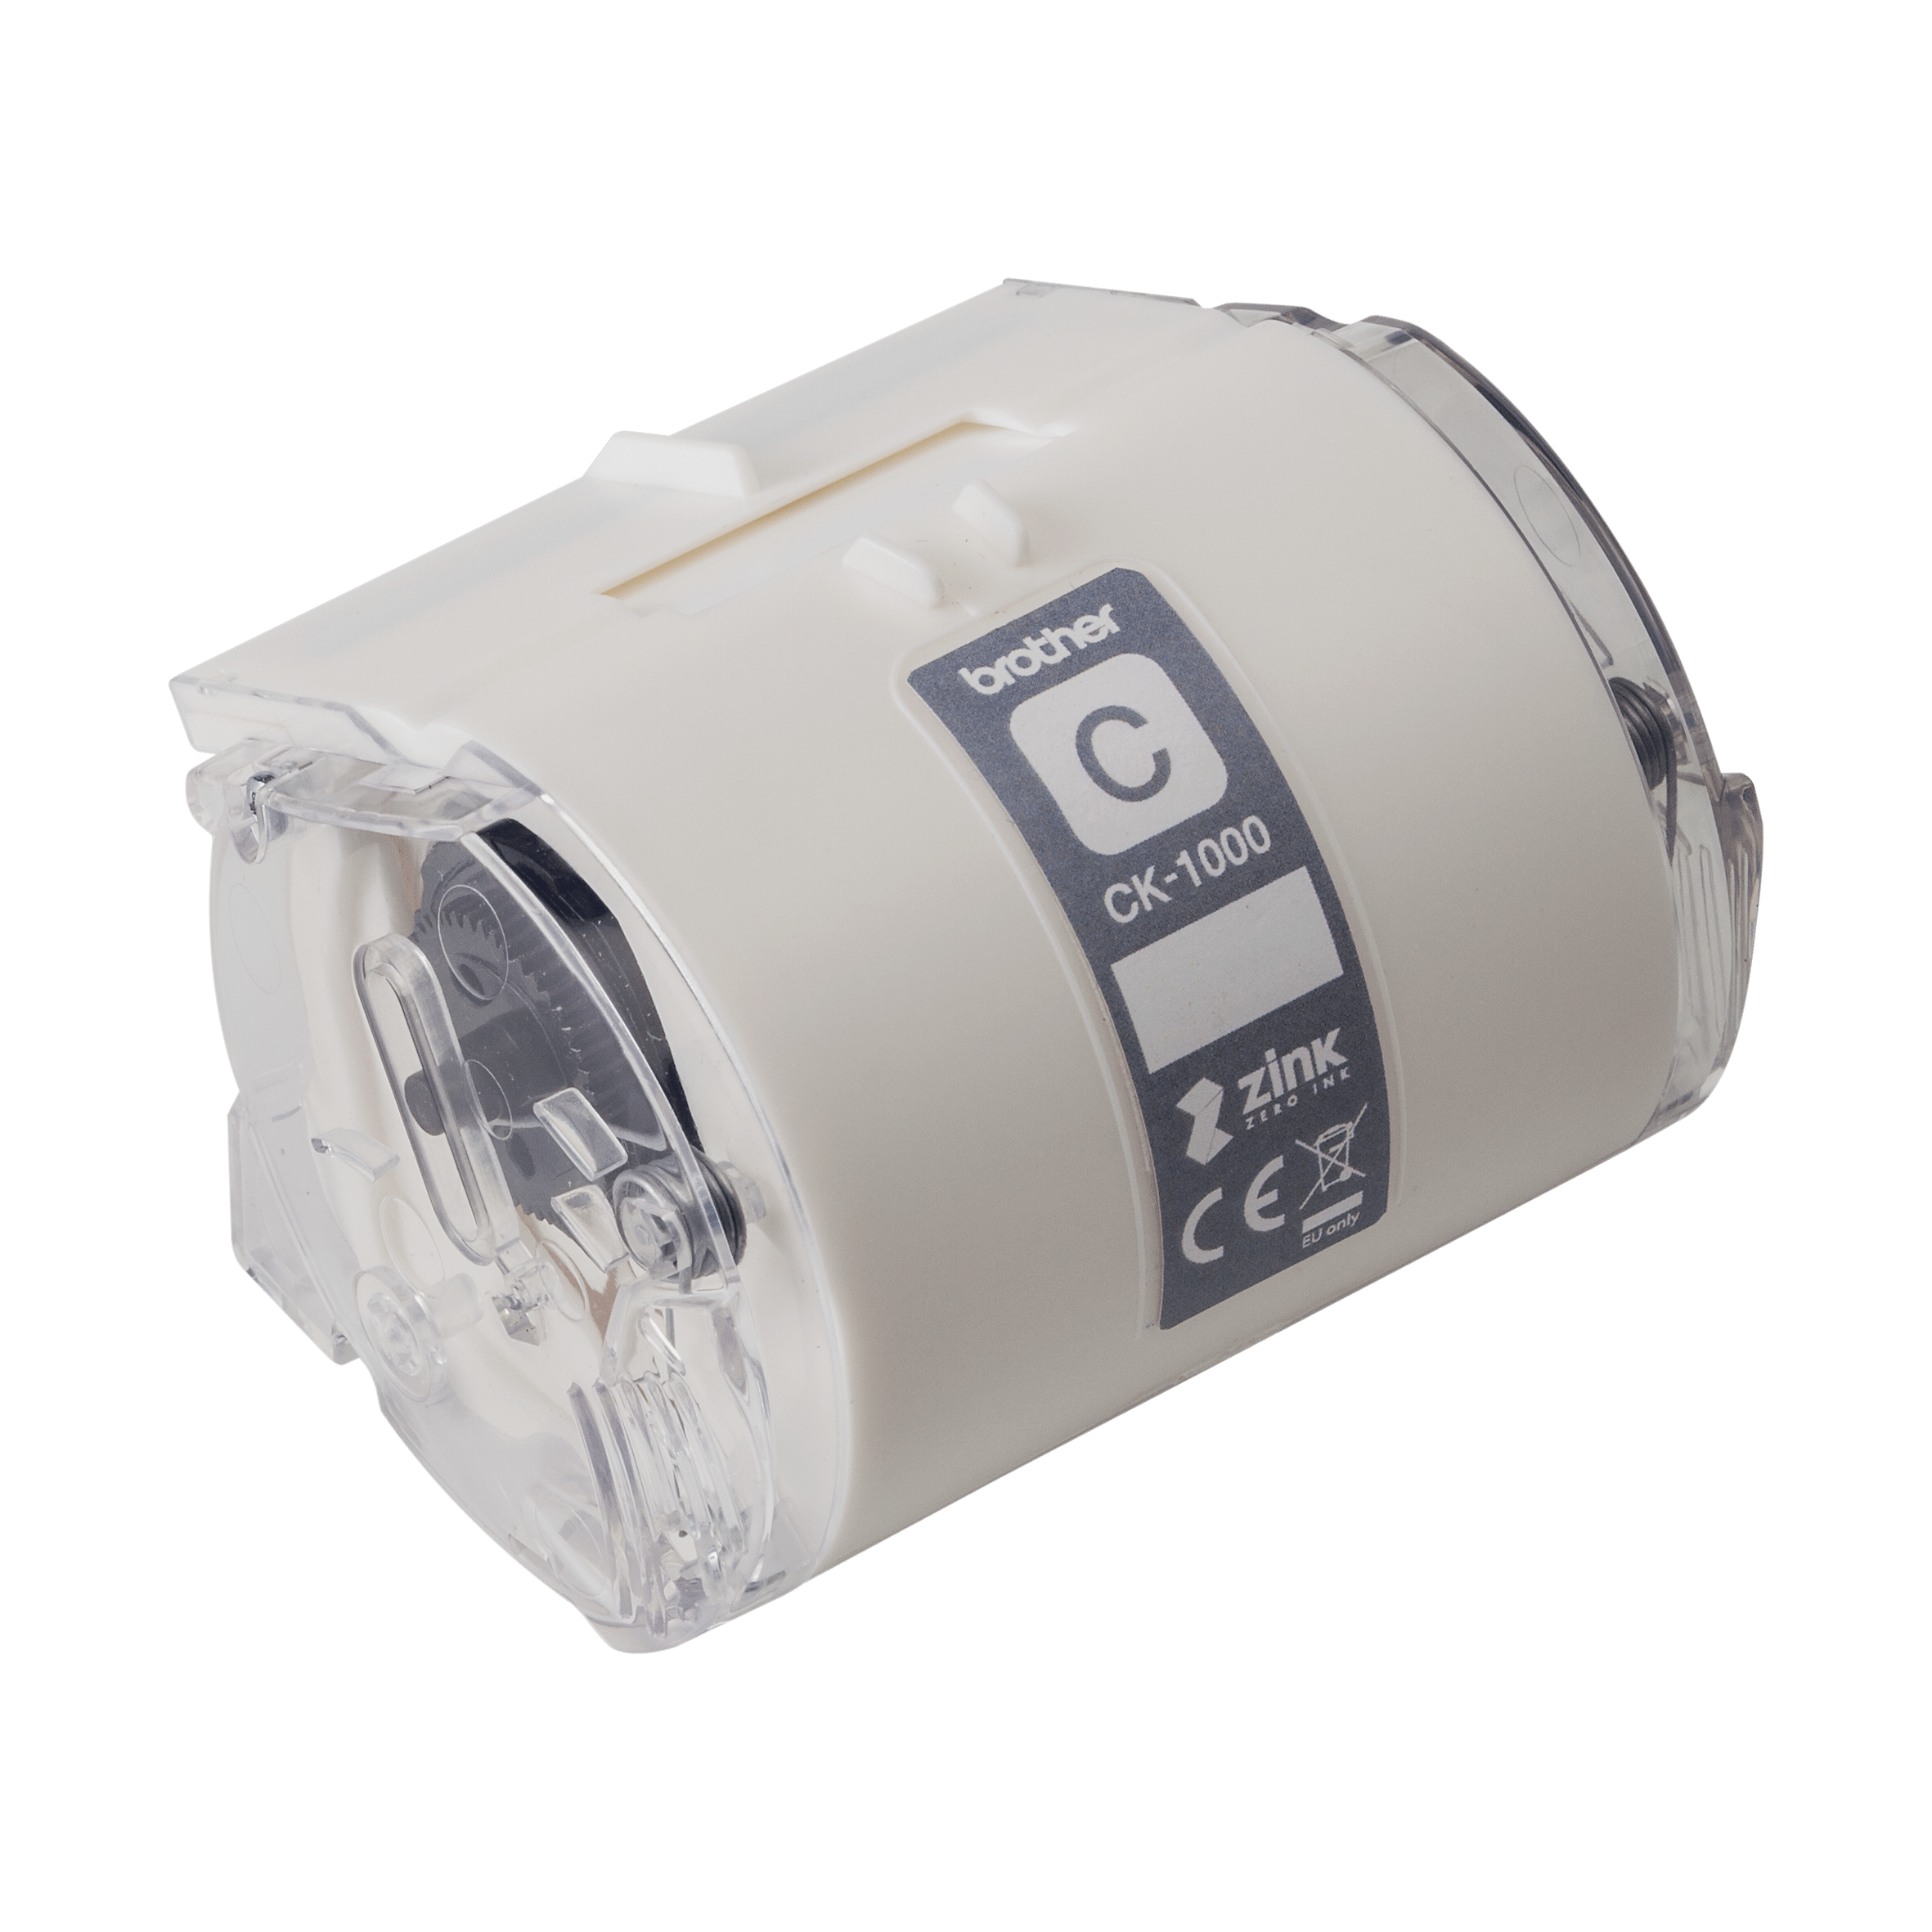 Genuine Brother CK-1000 print head cleaning roll, 50mm wide 2